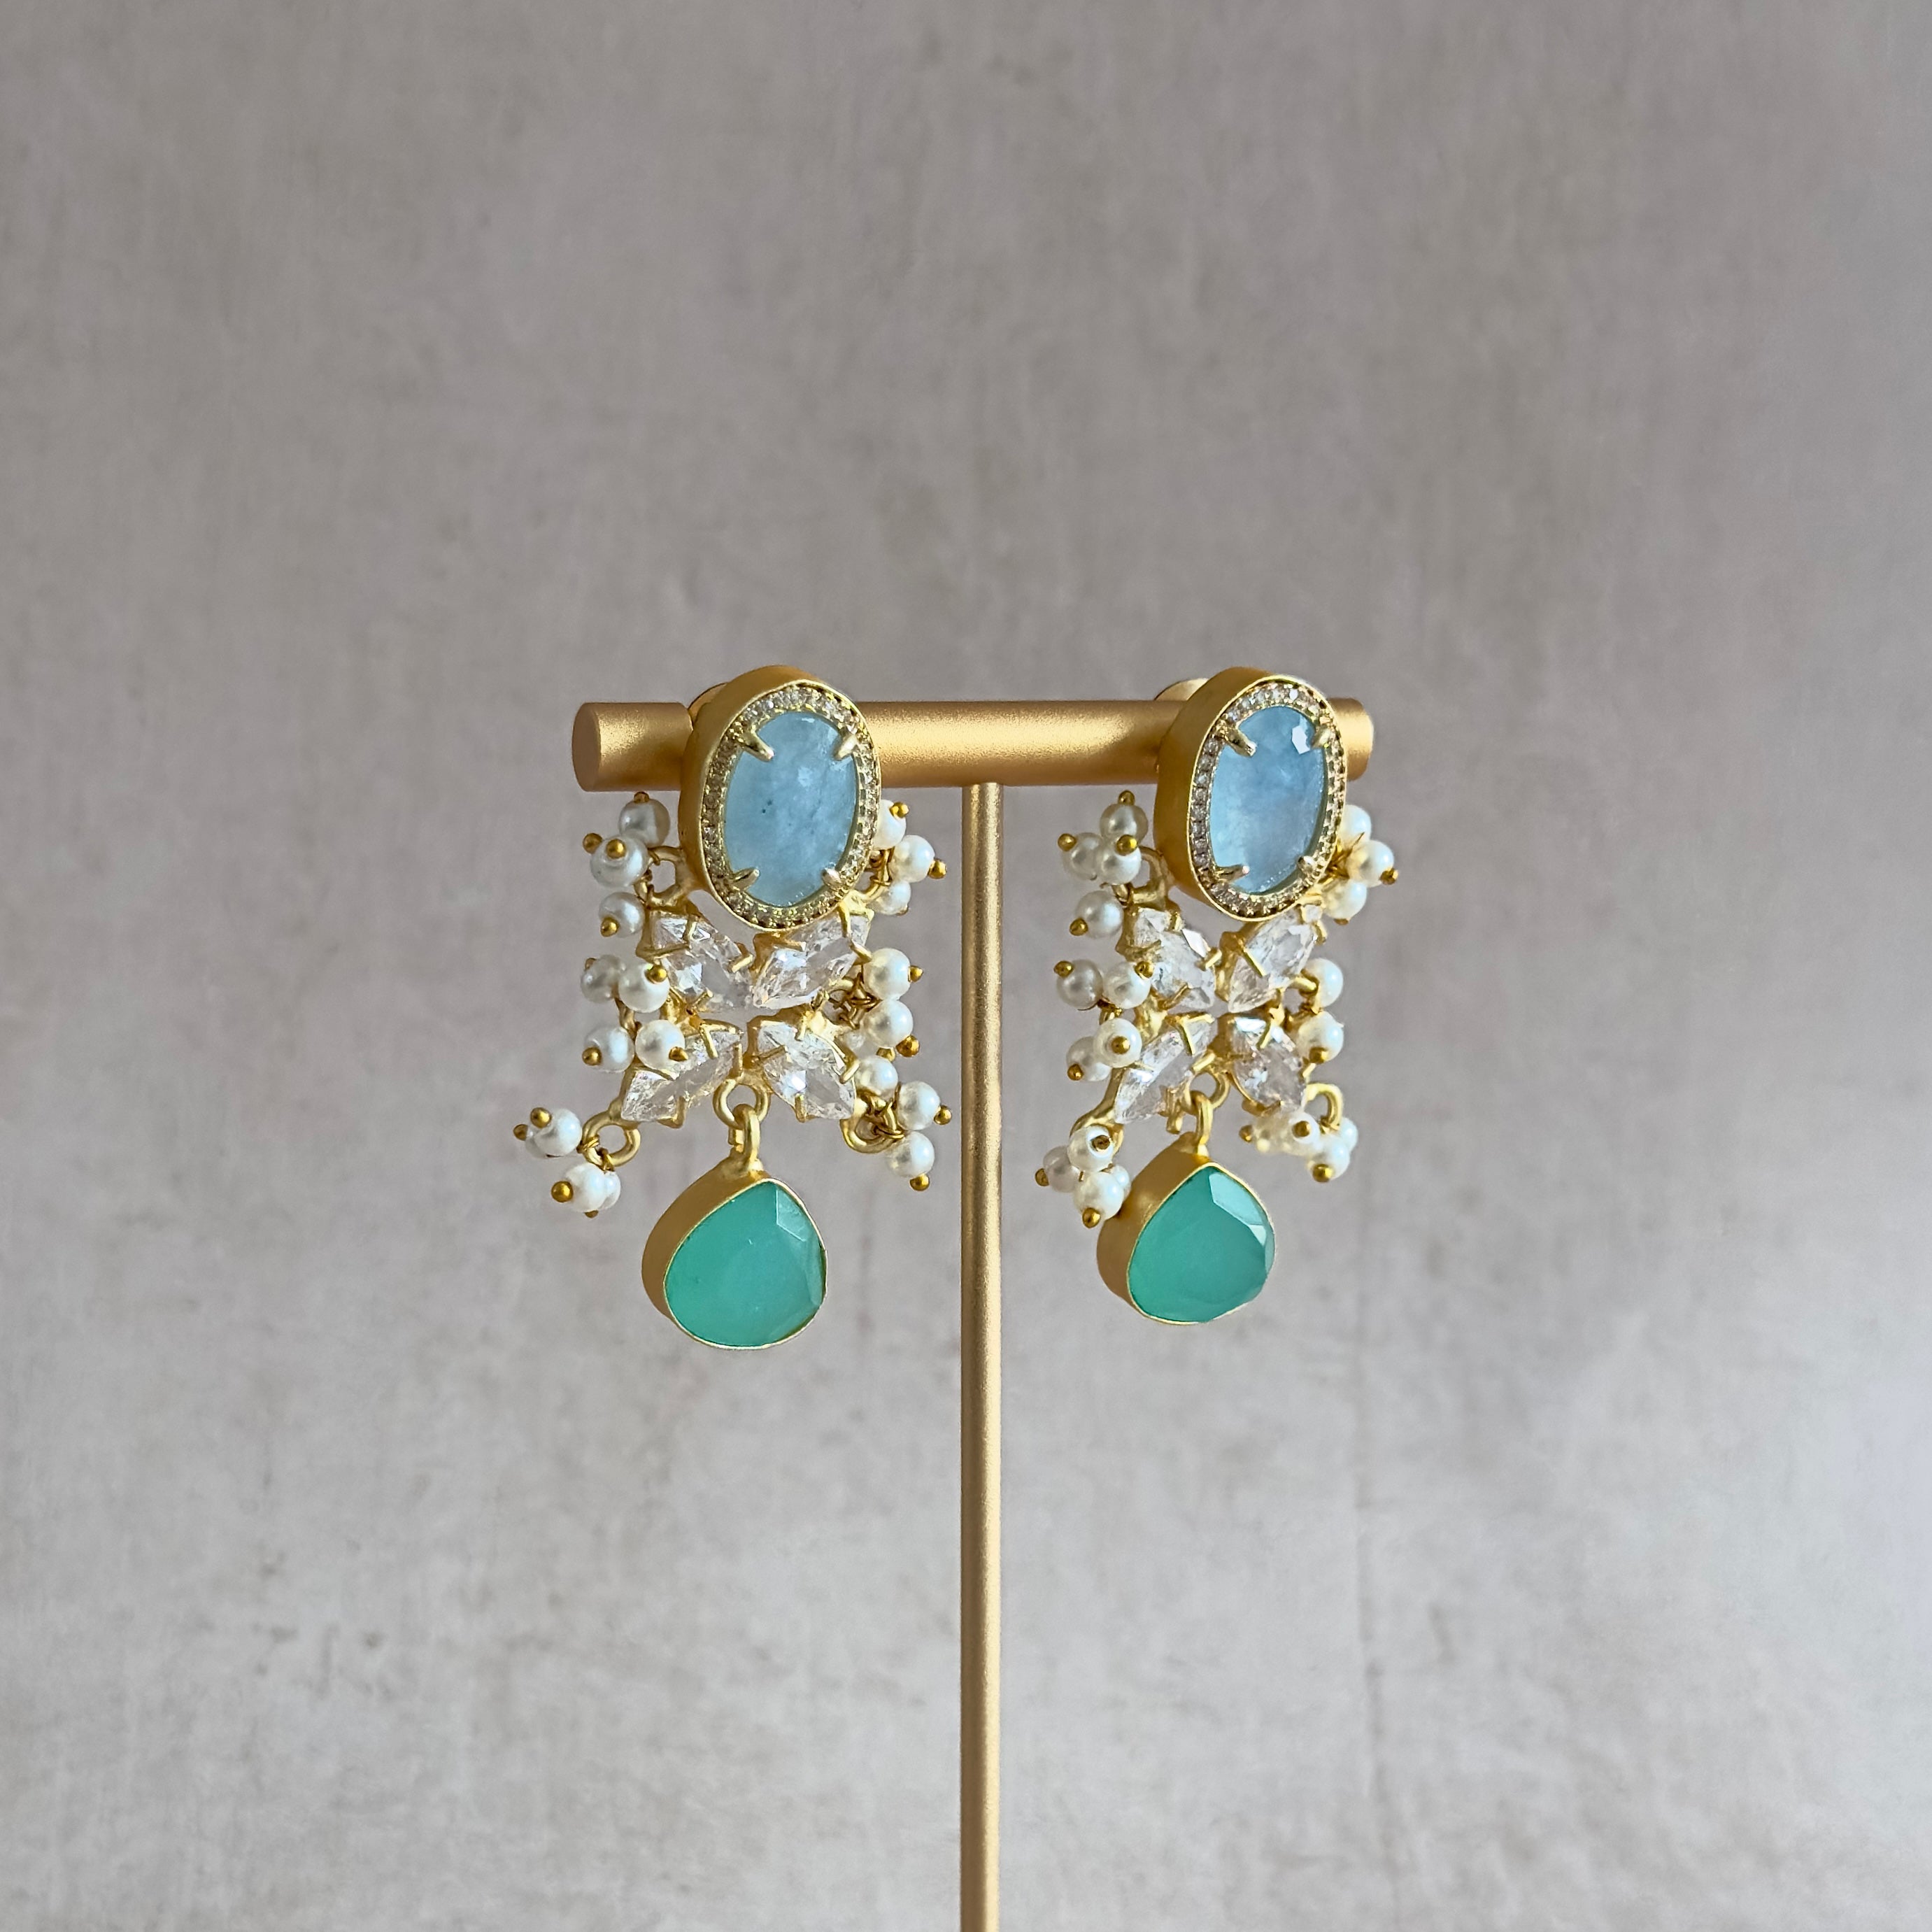 Sparkle and shine with our Madiha Mint Crystal Drop Earrings! Featuring stunning hues of blue and mint, these earrings are sure to catch anyone's eye. The cubic zirconia adds an extra touch of elegance and sparkle. Elevate any outfit with these dazzling earrings!